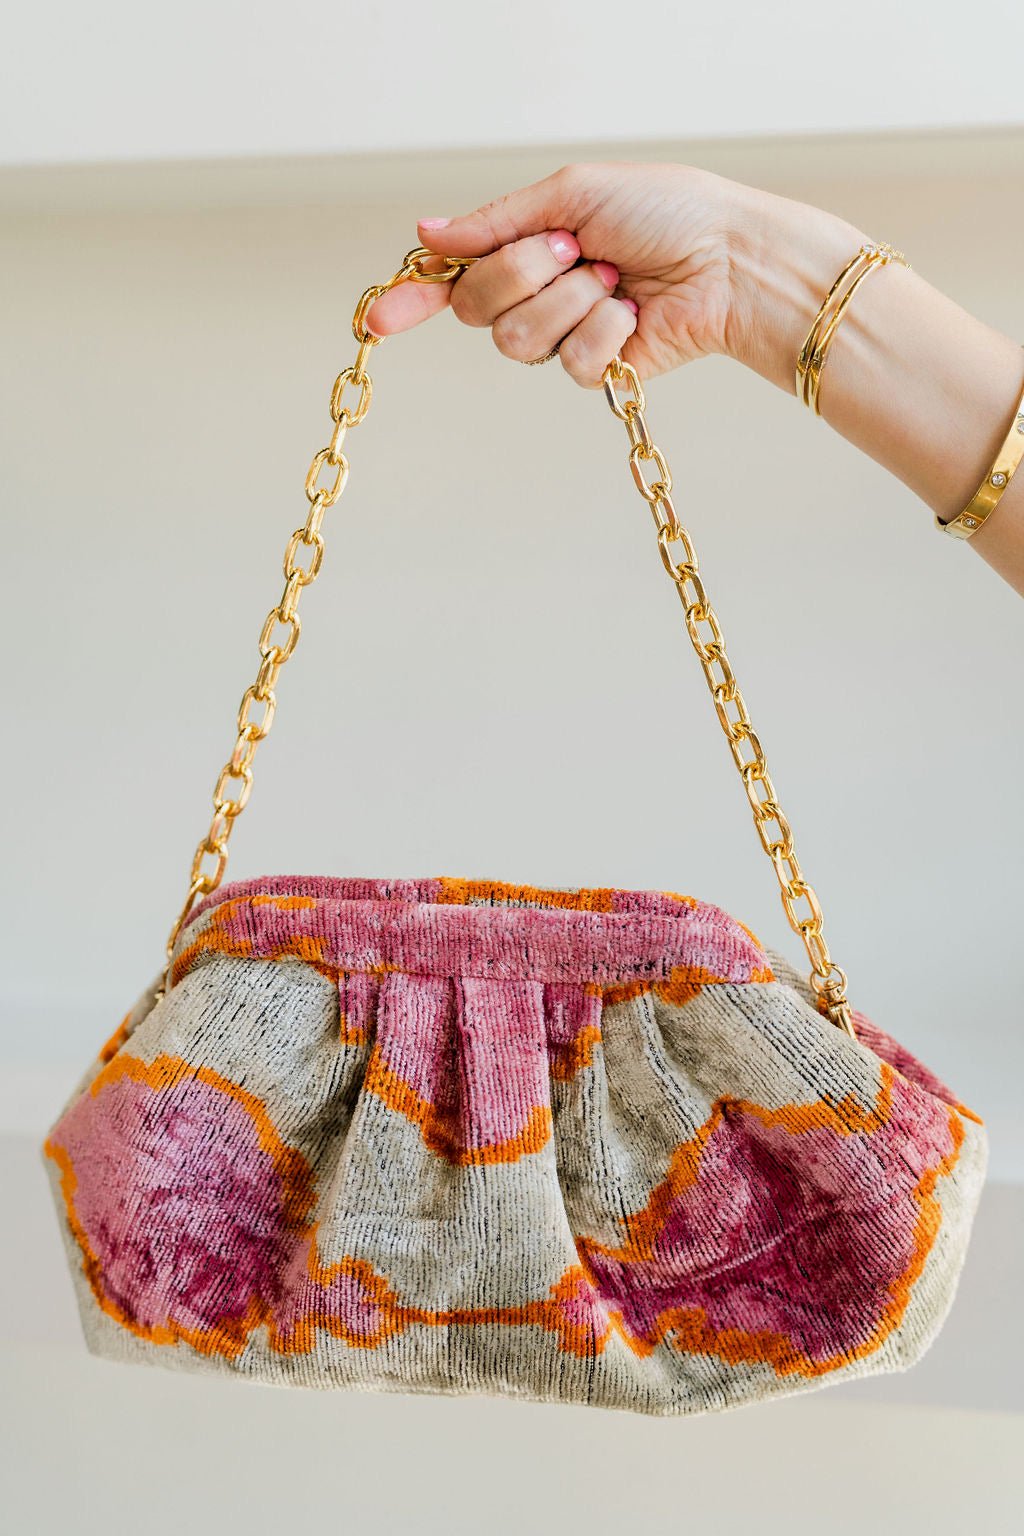 Pink/White Cloud Dolly Bag - Amor Lafayette